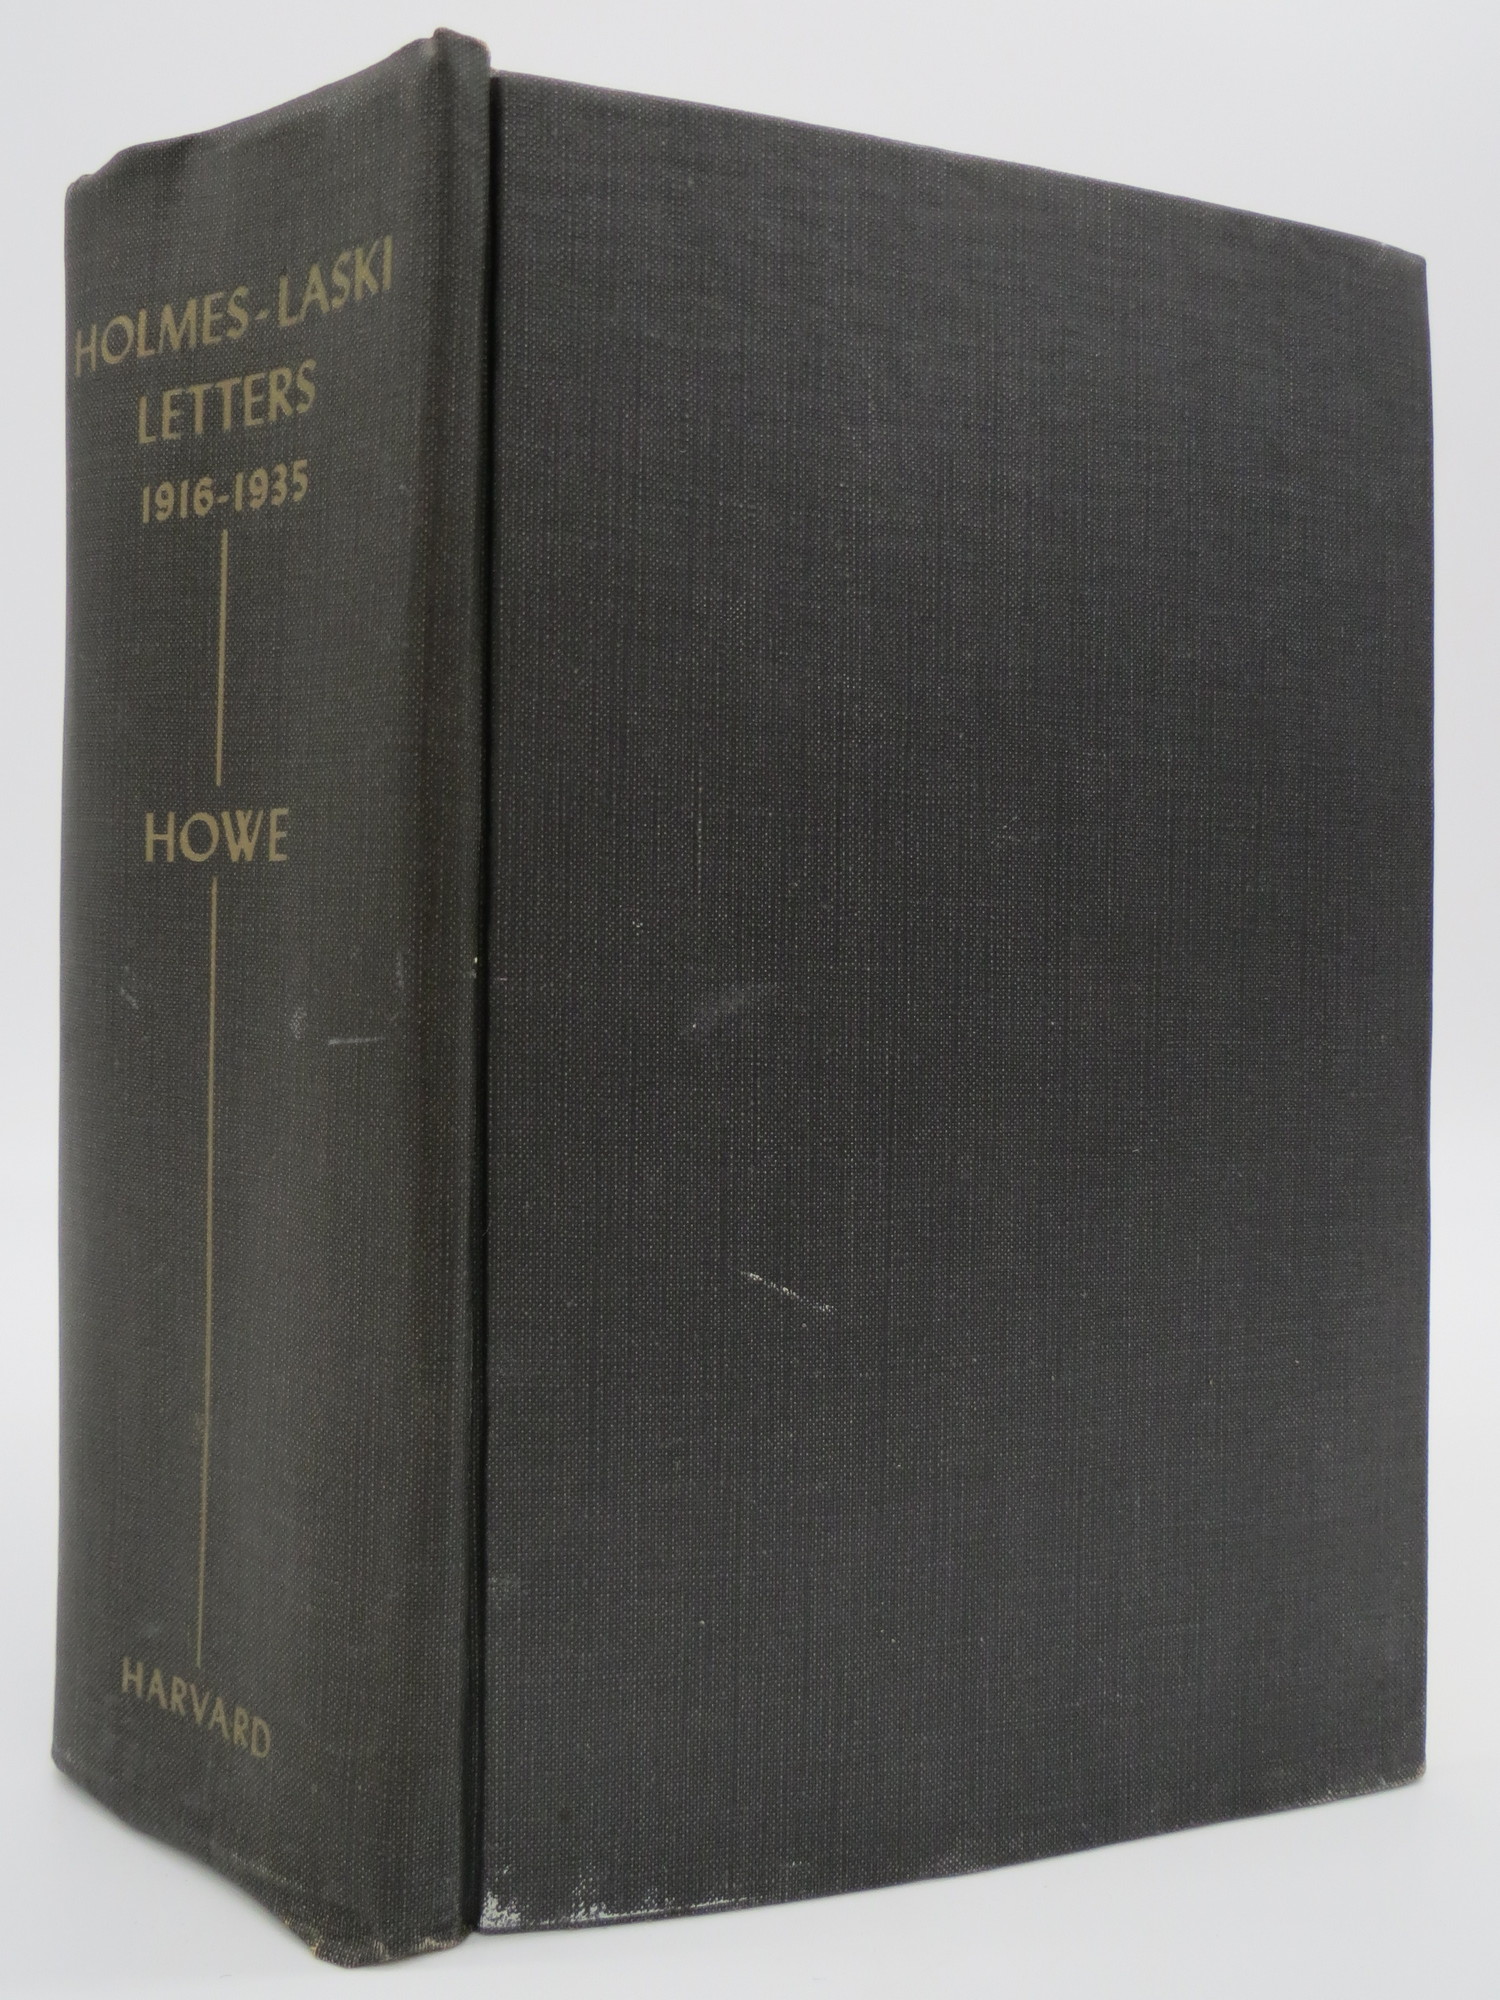 Image for THE HOLMES-LASKI LETTERS. THE CORRESPONDENCE OF MR JUSTICE HOLMES AND HAROLD LASKI 1916 - 1935. (COMPLETE TWO VOLUMES BOUND IN ONE)